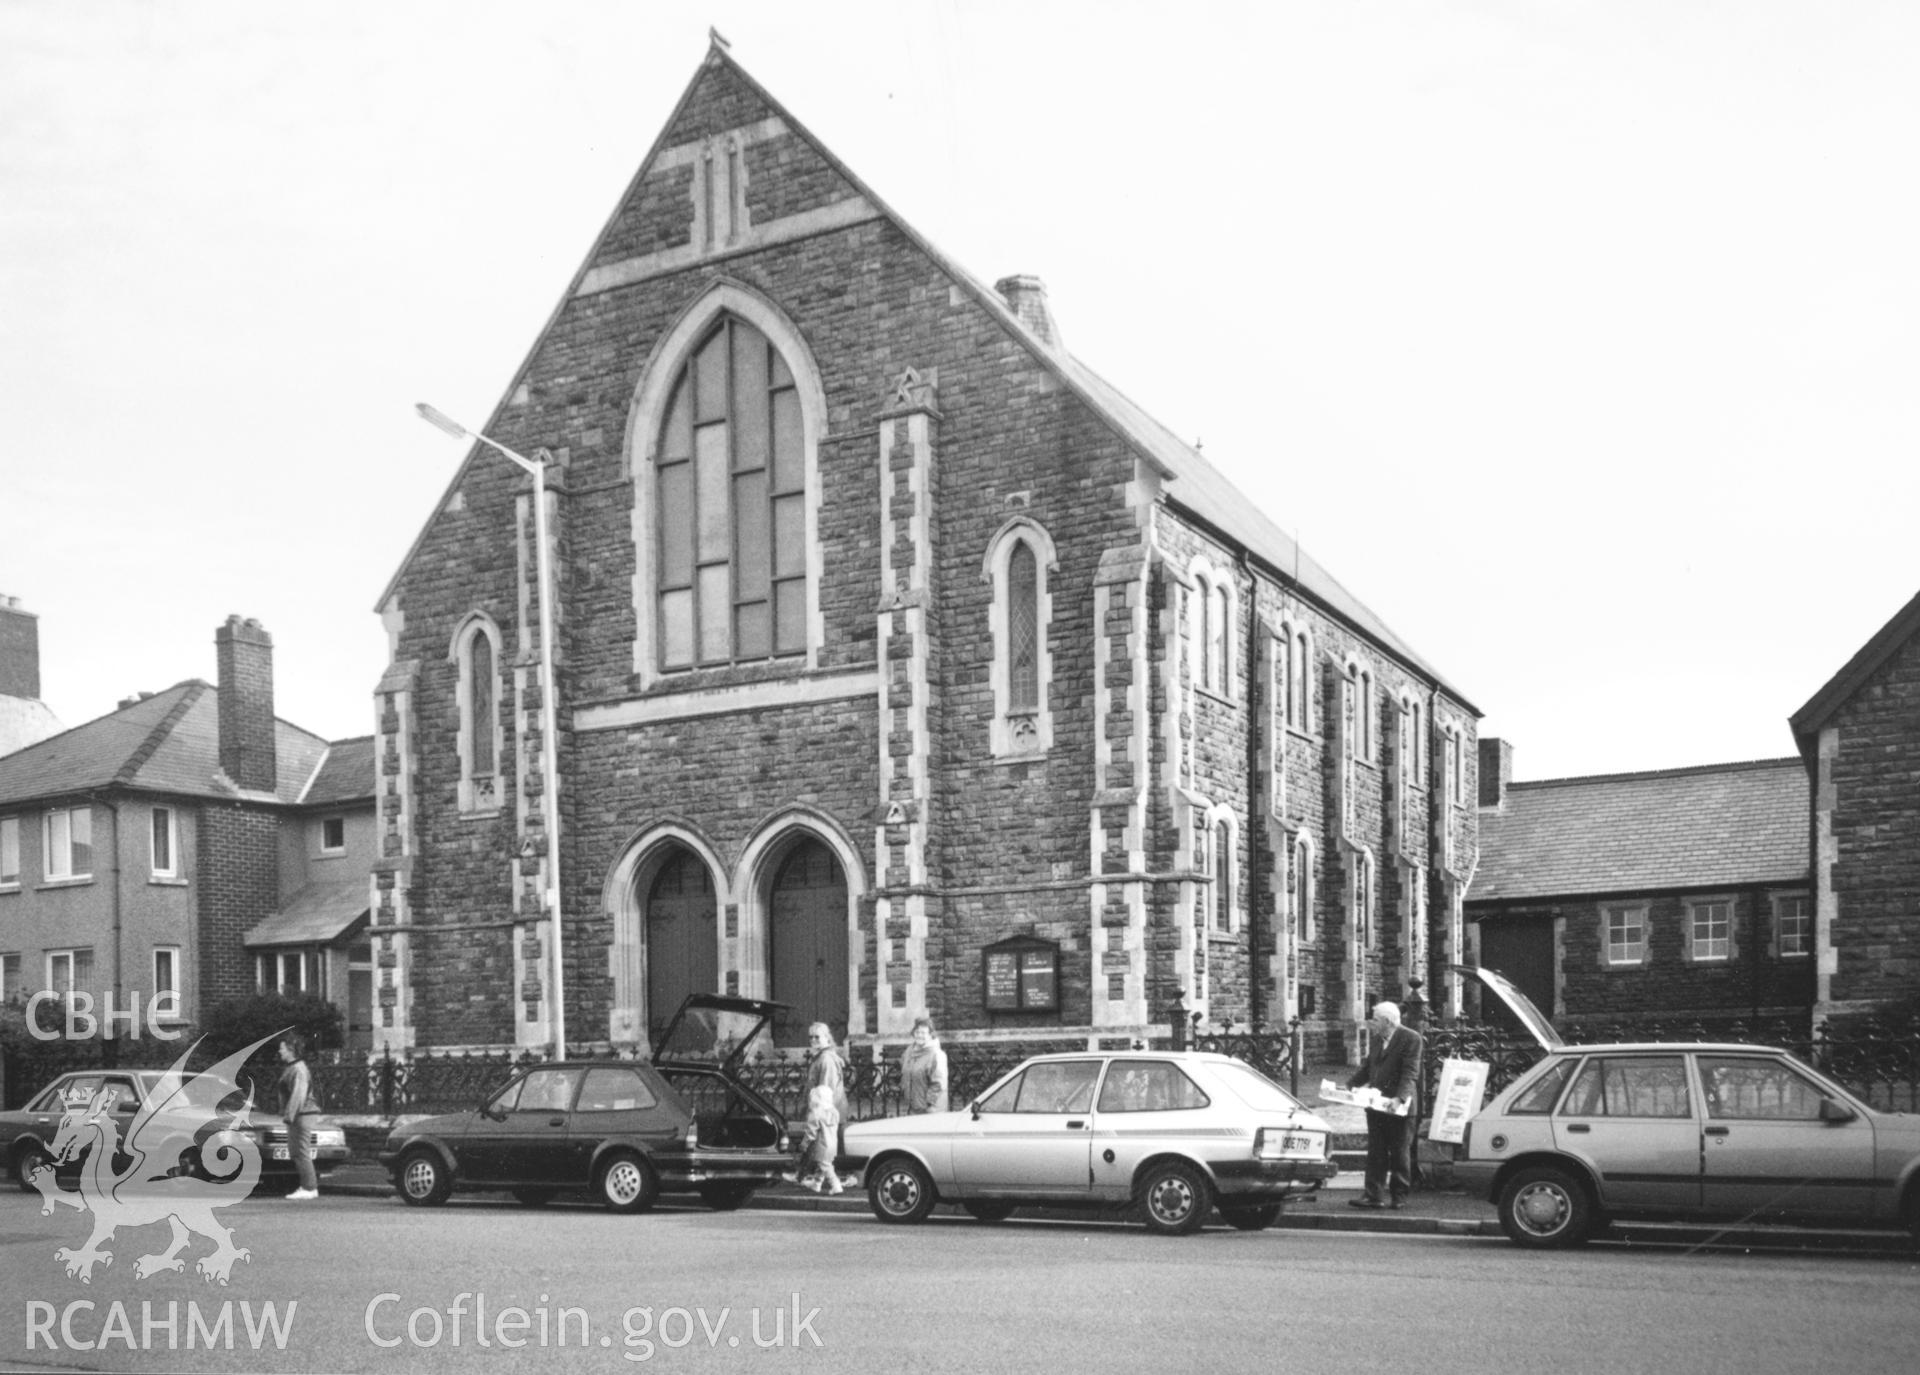 Digital copy of a black and white photograph showing an exterior view of Priory Road Wesleyan Methodist Chapel, Milford Haven, taken by Robert Scourfield, c.1996.